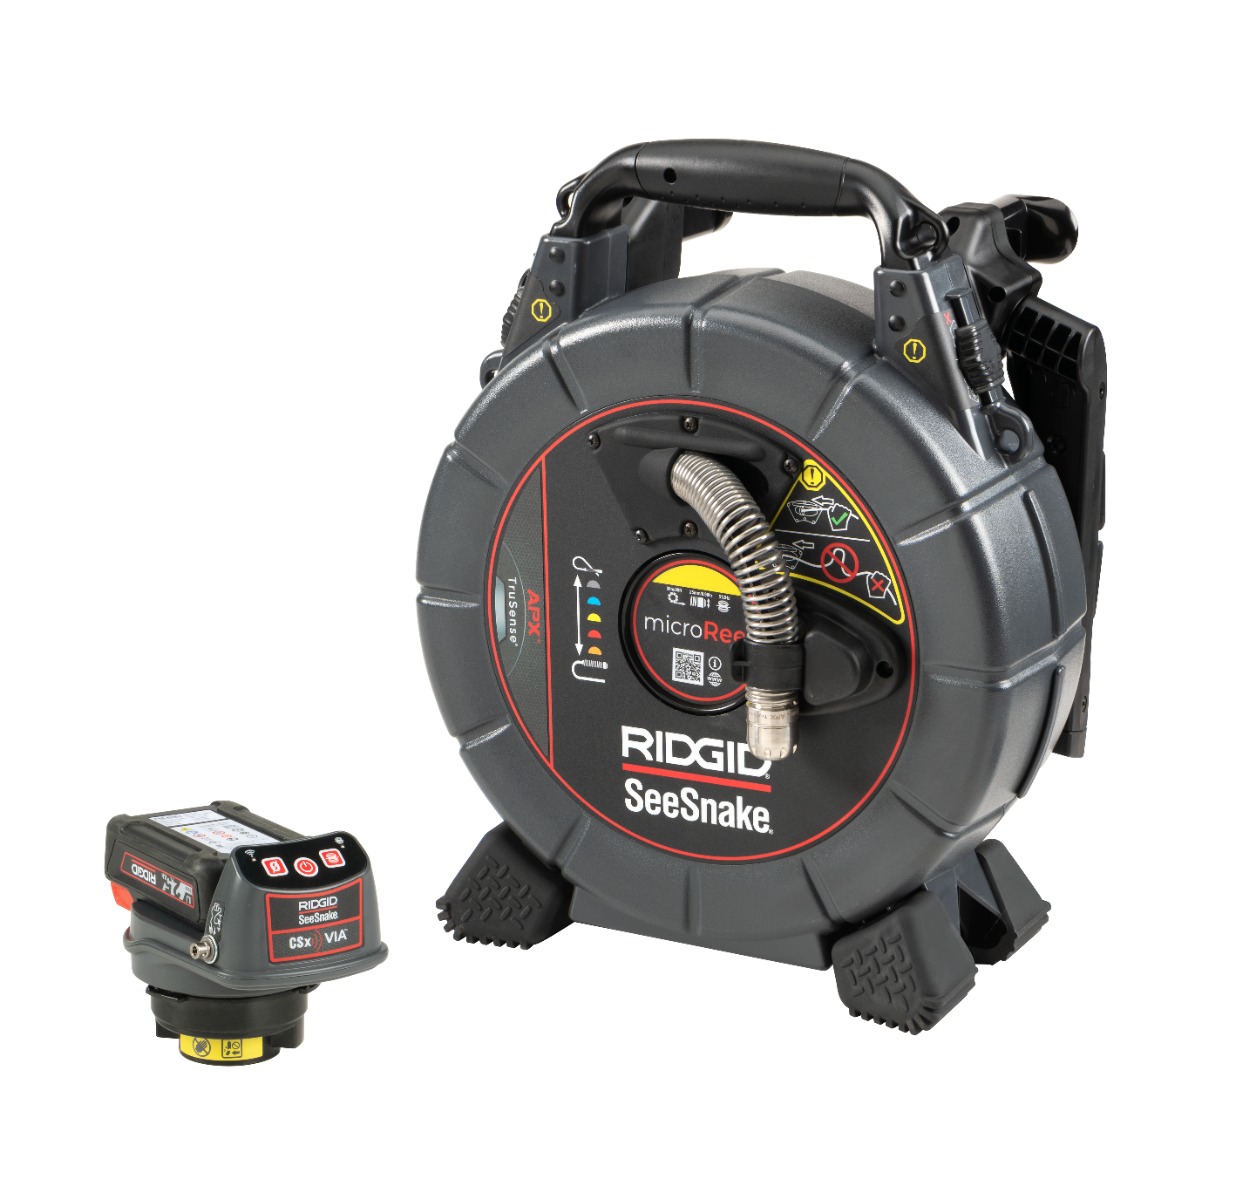 Ridgid 78728 SeeSnake MicroREEL APX & CSX Via System with TruSense - 1 Battery and 1 Charger Included